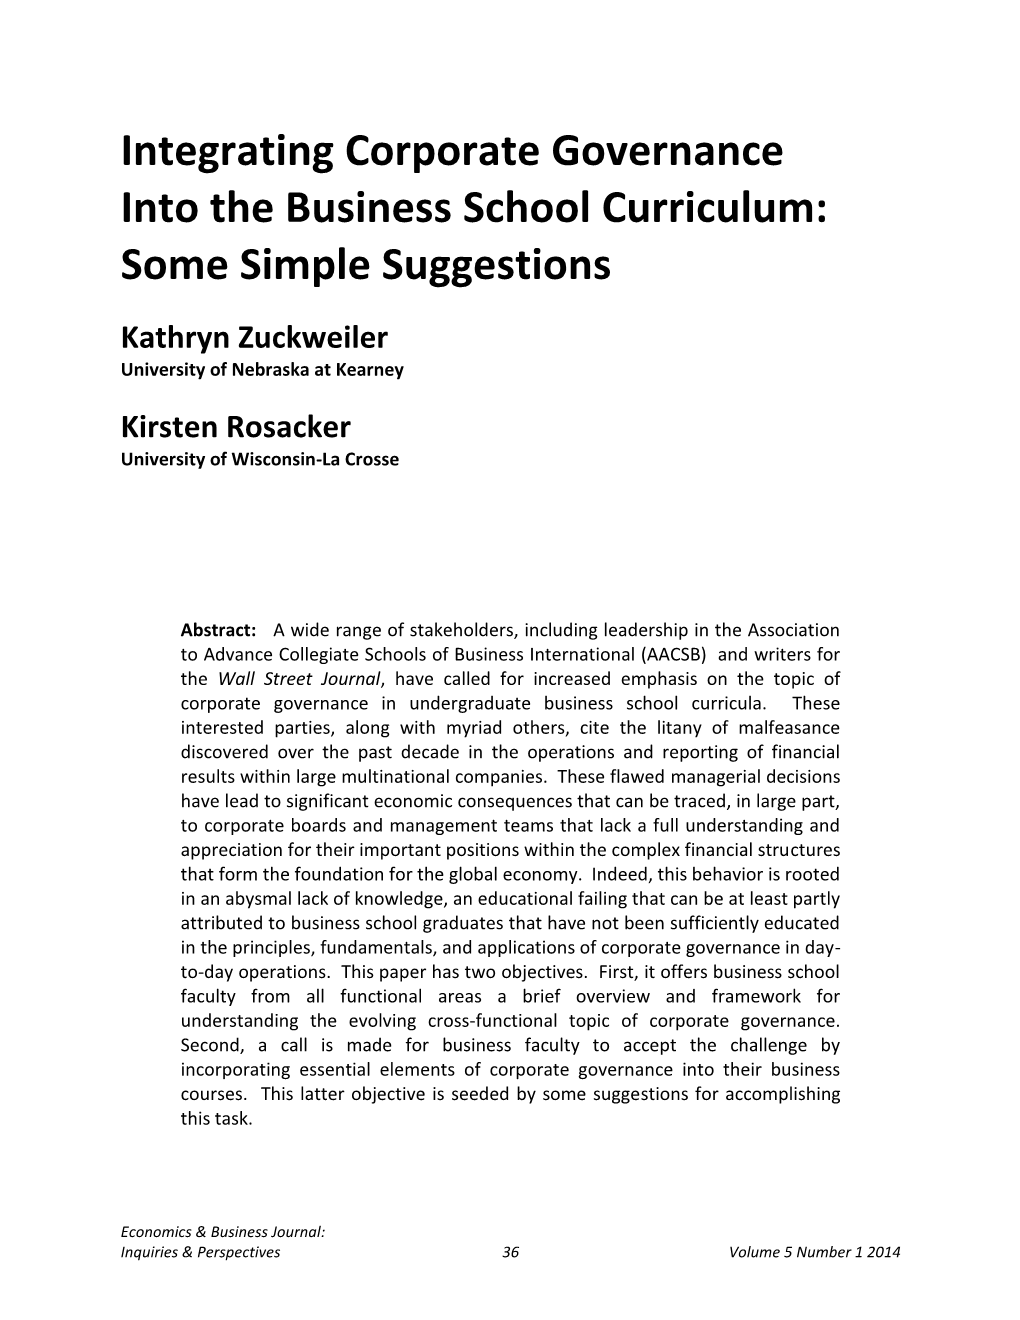 Integrating Corporate Governance Into the Business School Curriculum: Some Simple Suggestions